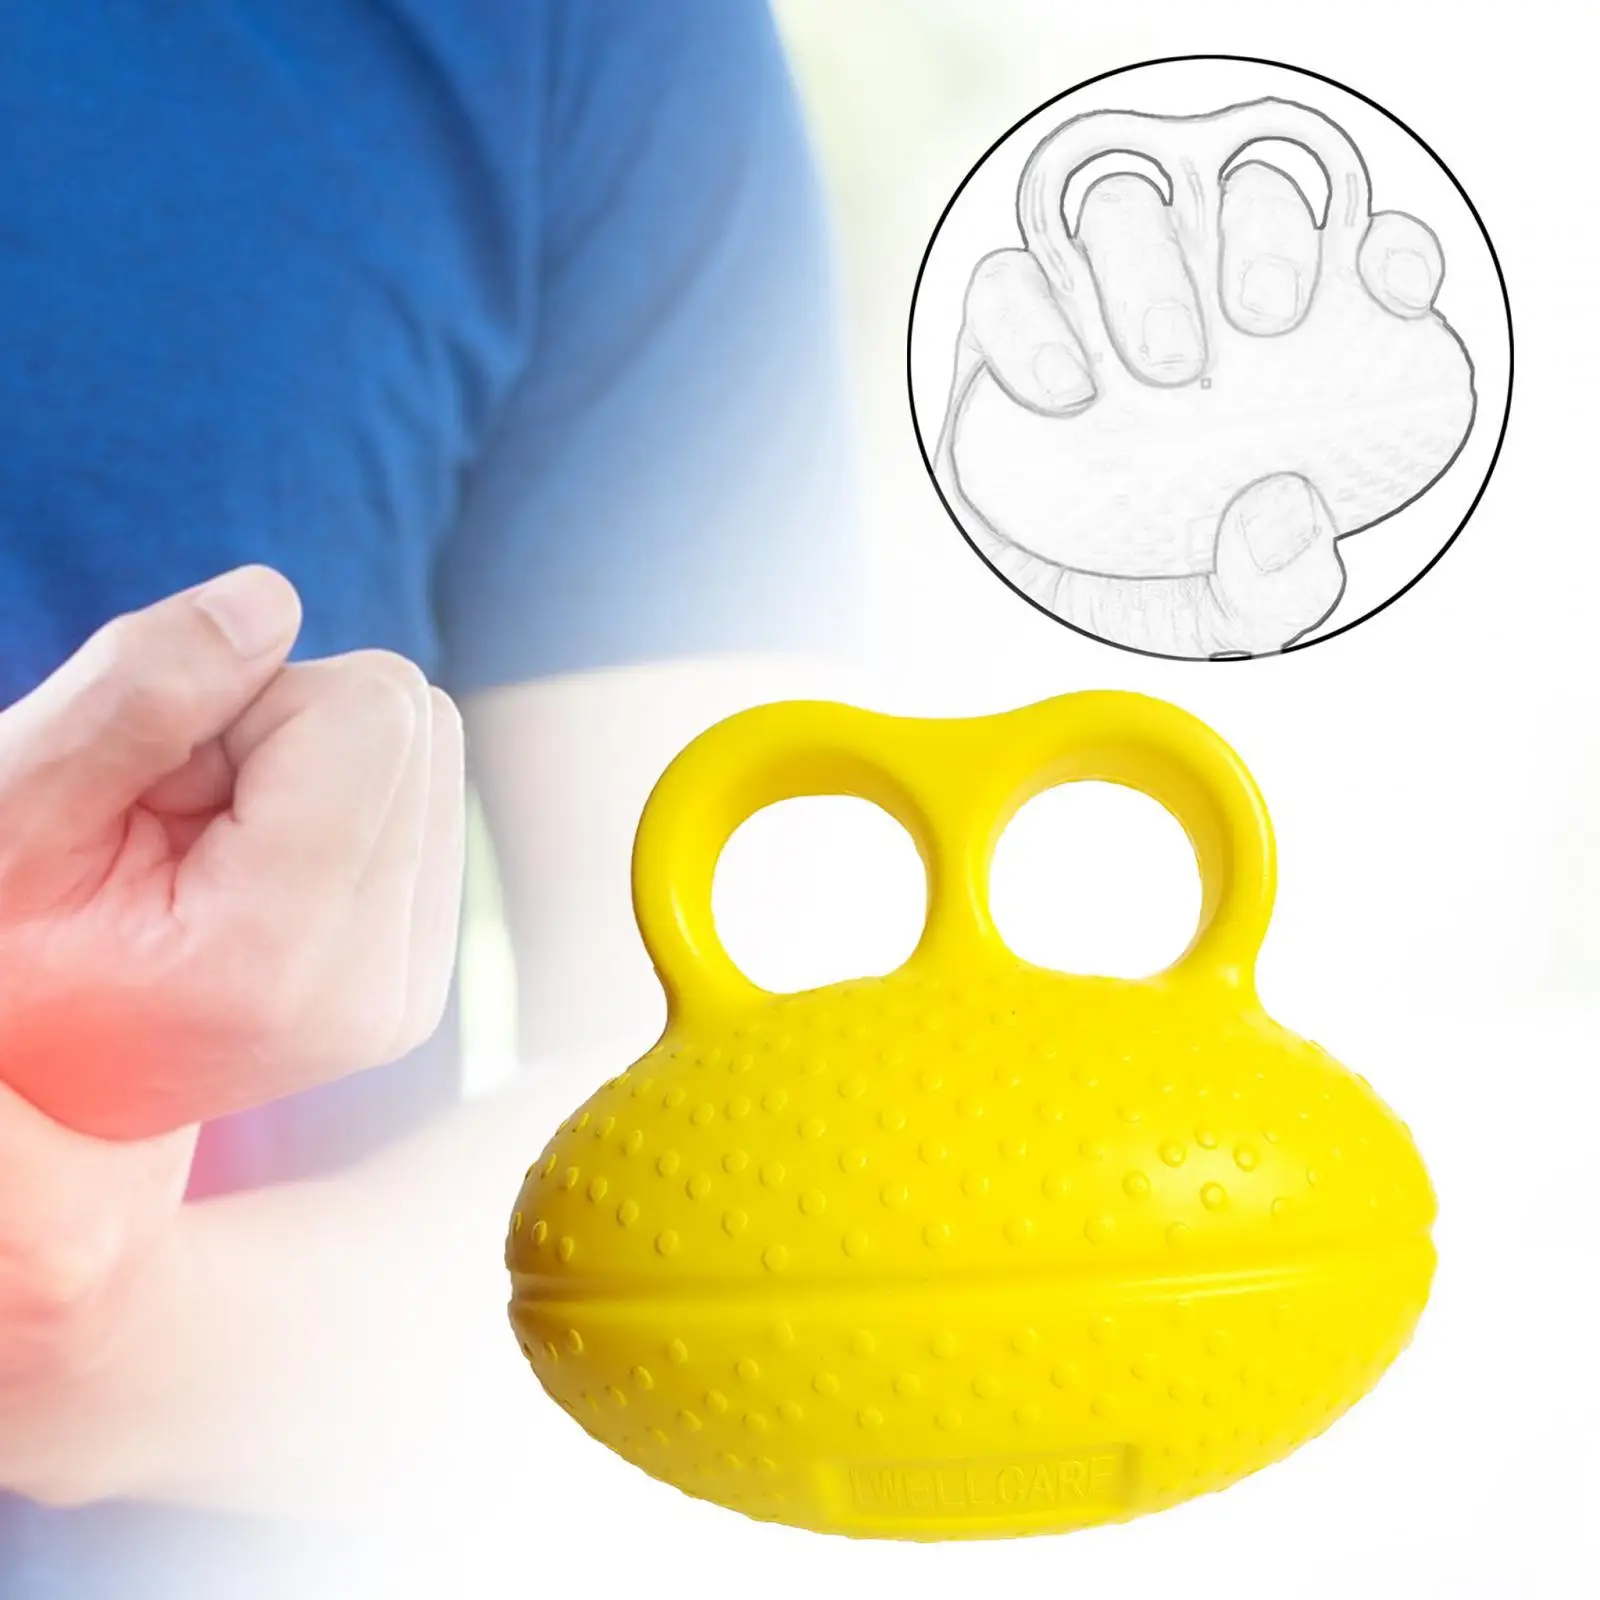 Finger Exerciser PU Build Hand, Finger and Wrist Strength Grip Exercise Ball for Adults Grip Strength Training Elderly Athletes